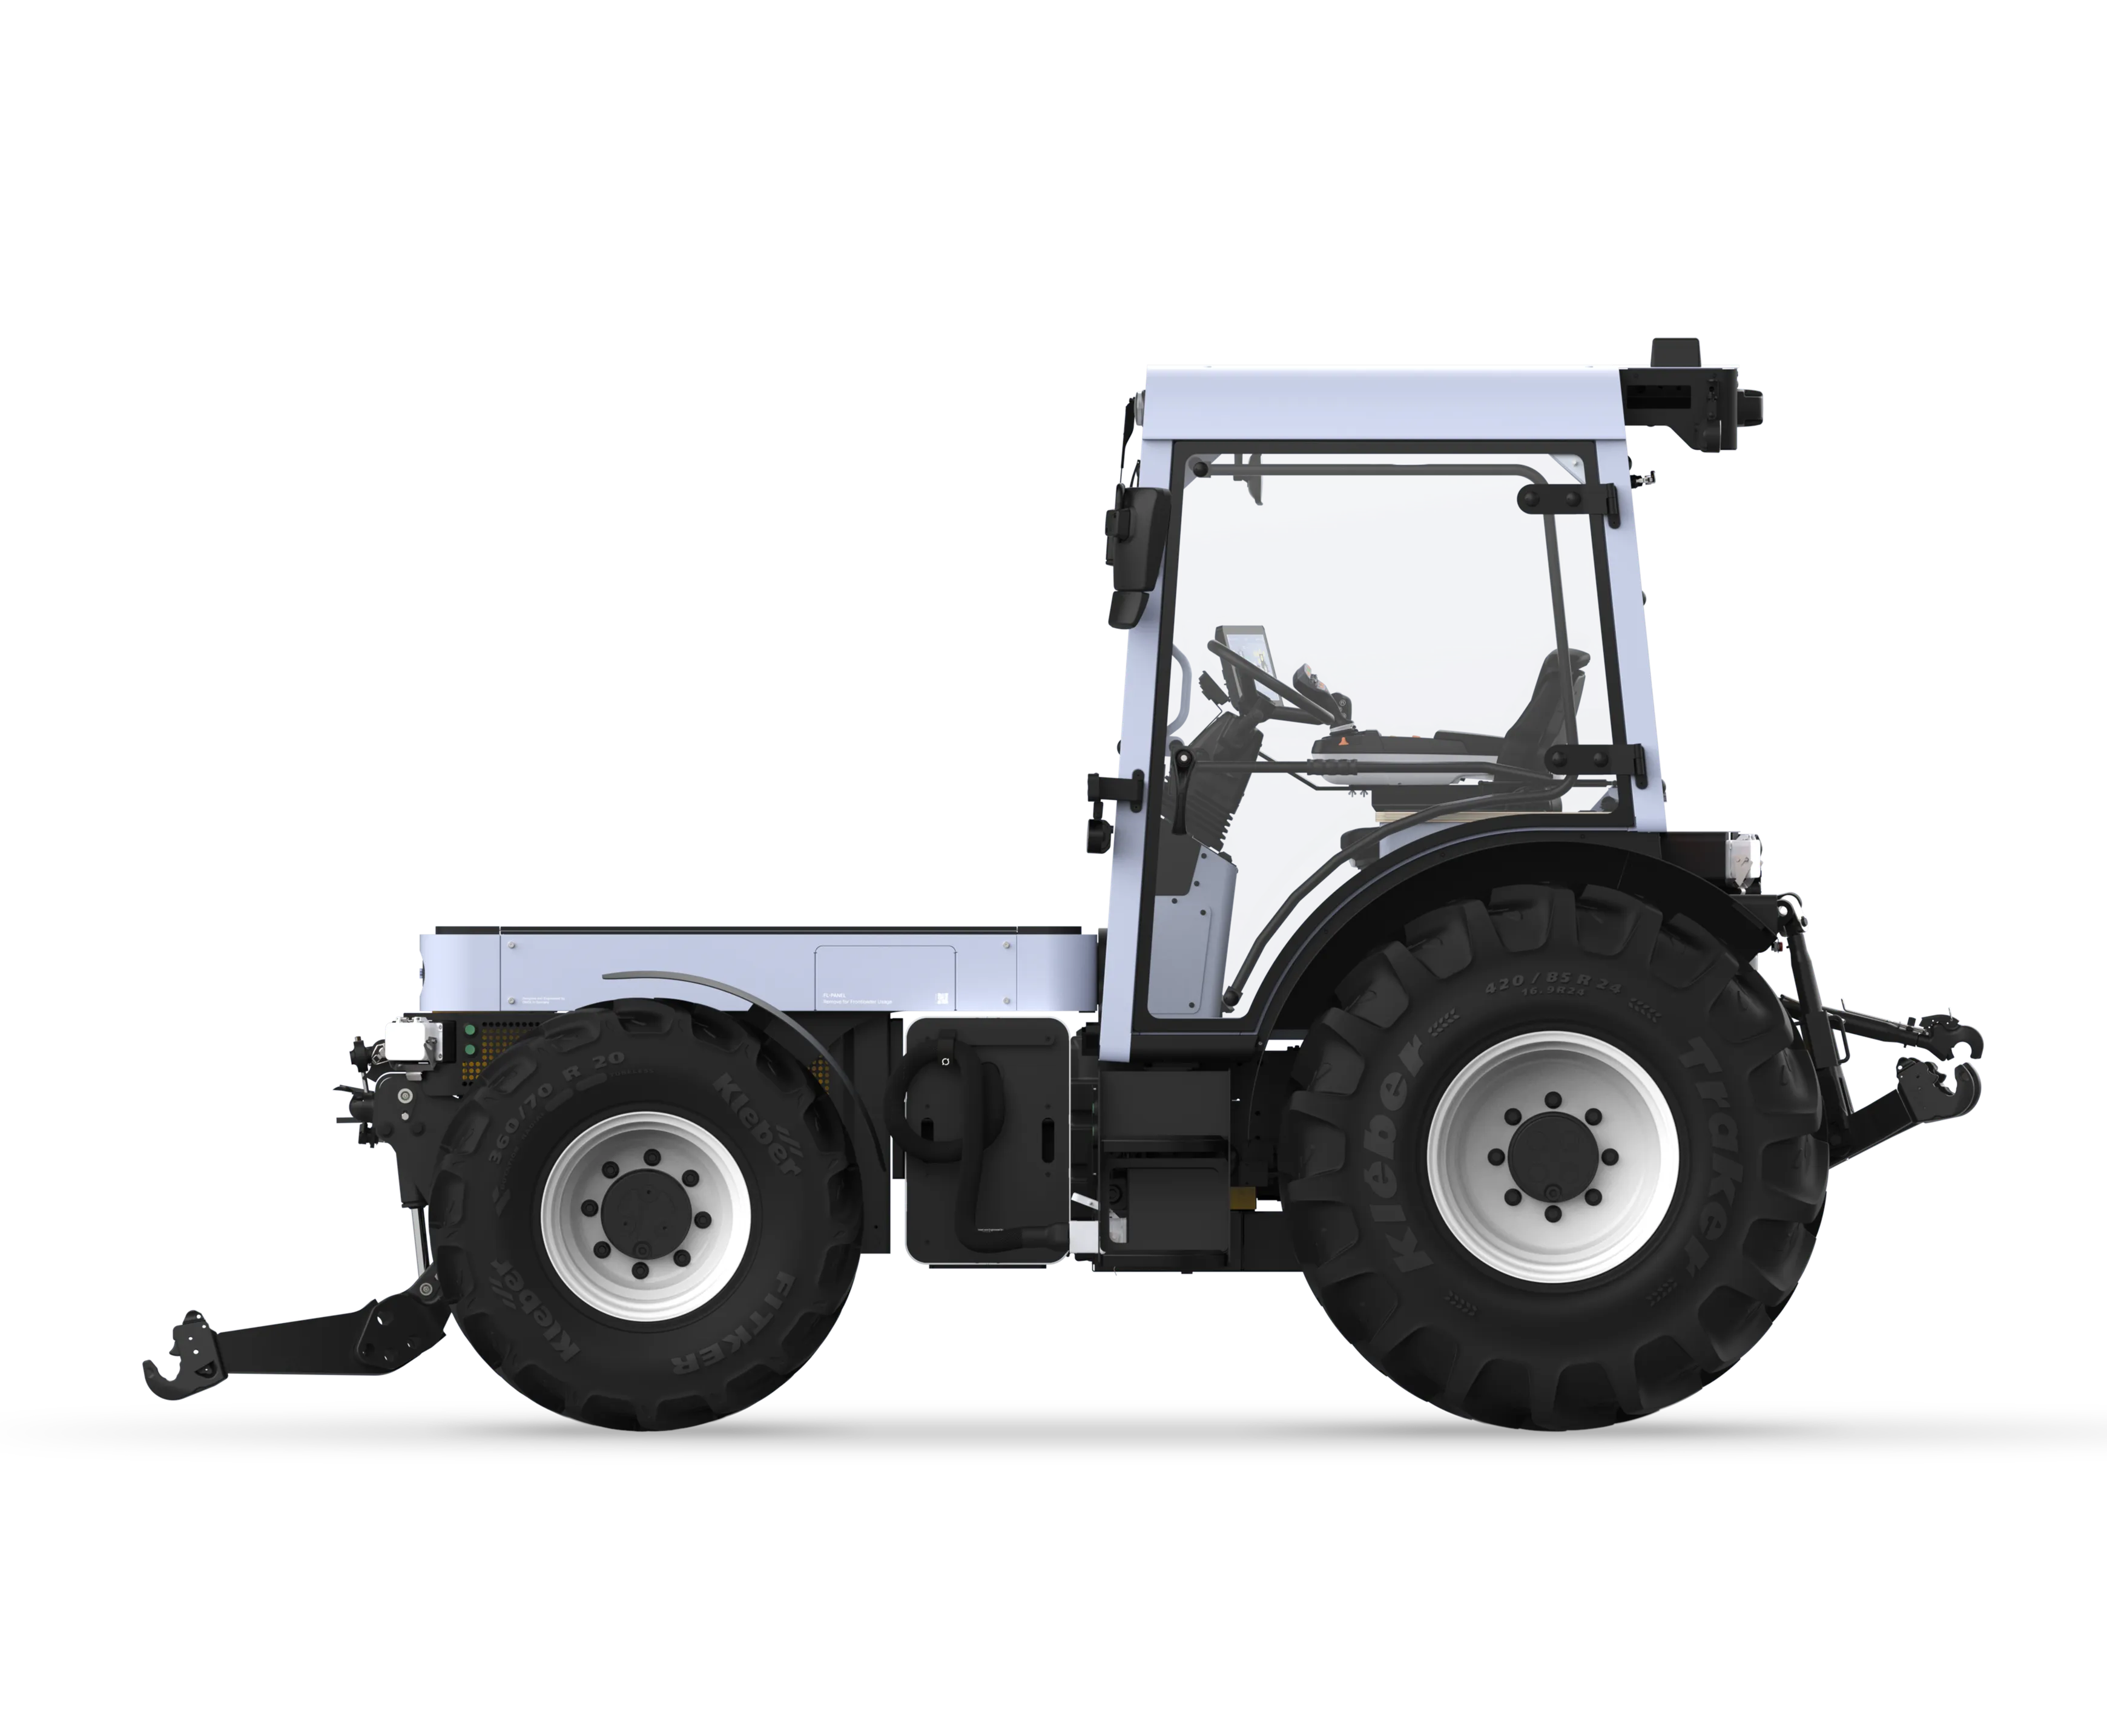 The Onox electric tractor displayed from the side